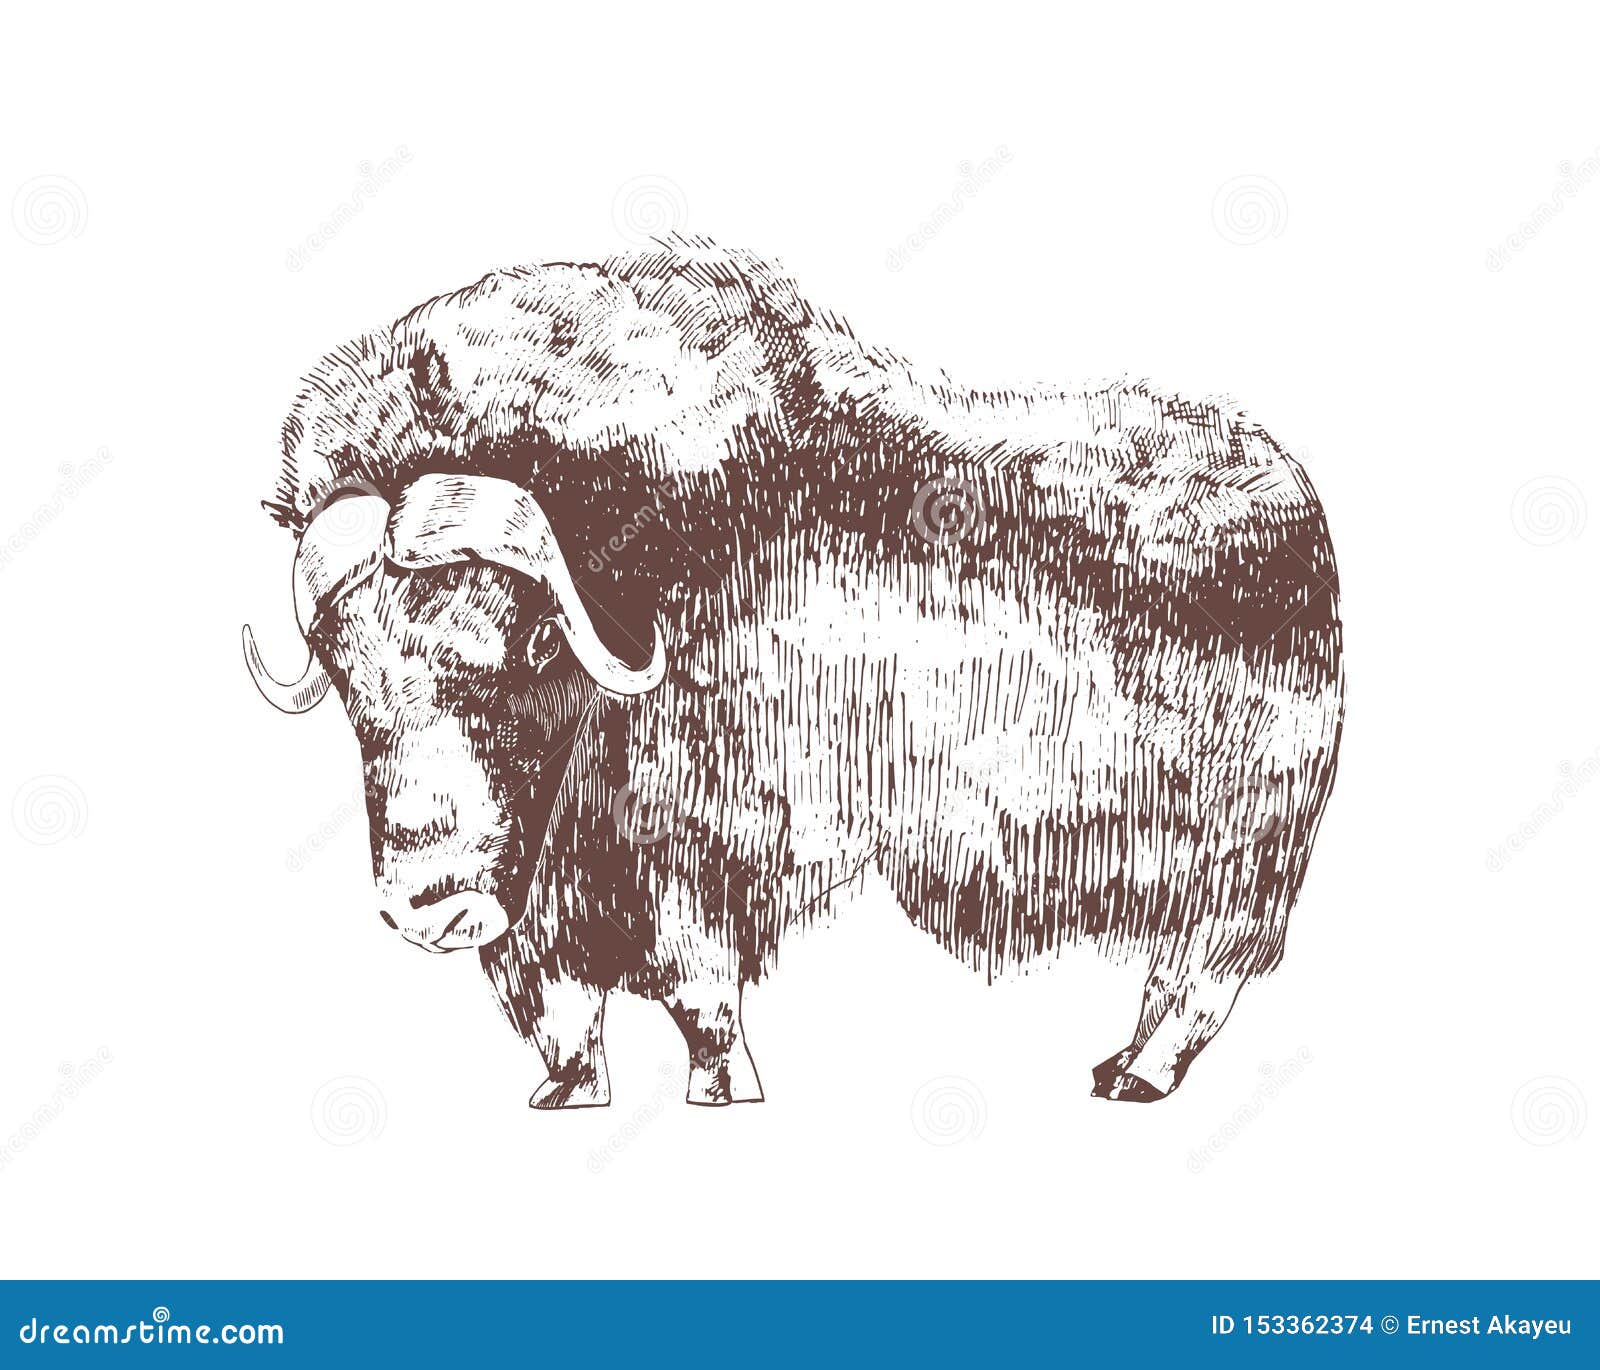 muskox hand drawn with contour lines on white background. monochrome sketch drawing of herbivorous hoofed bovine animal